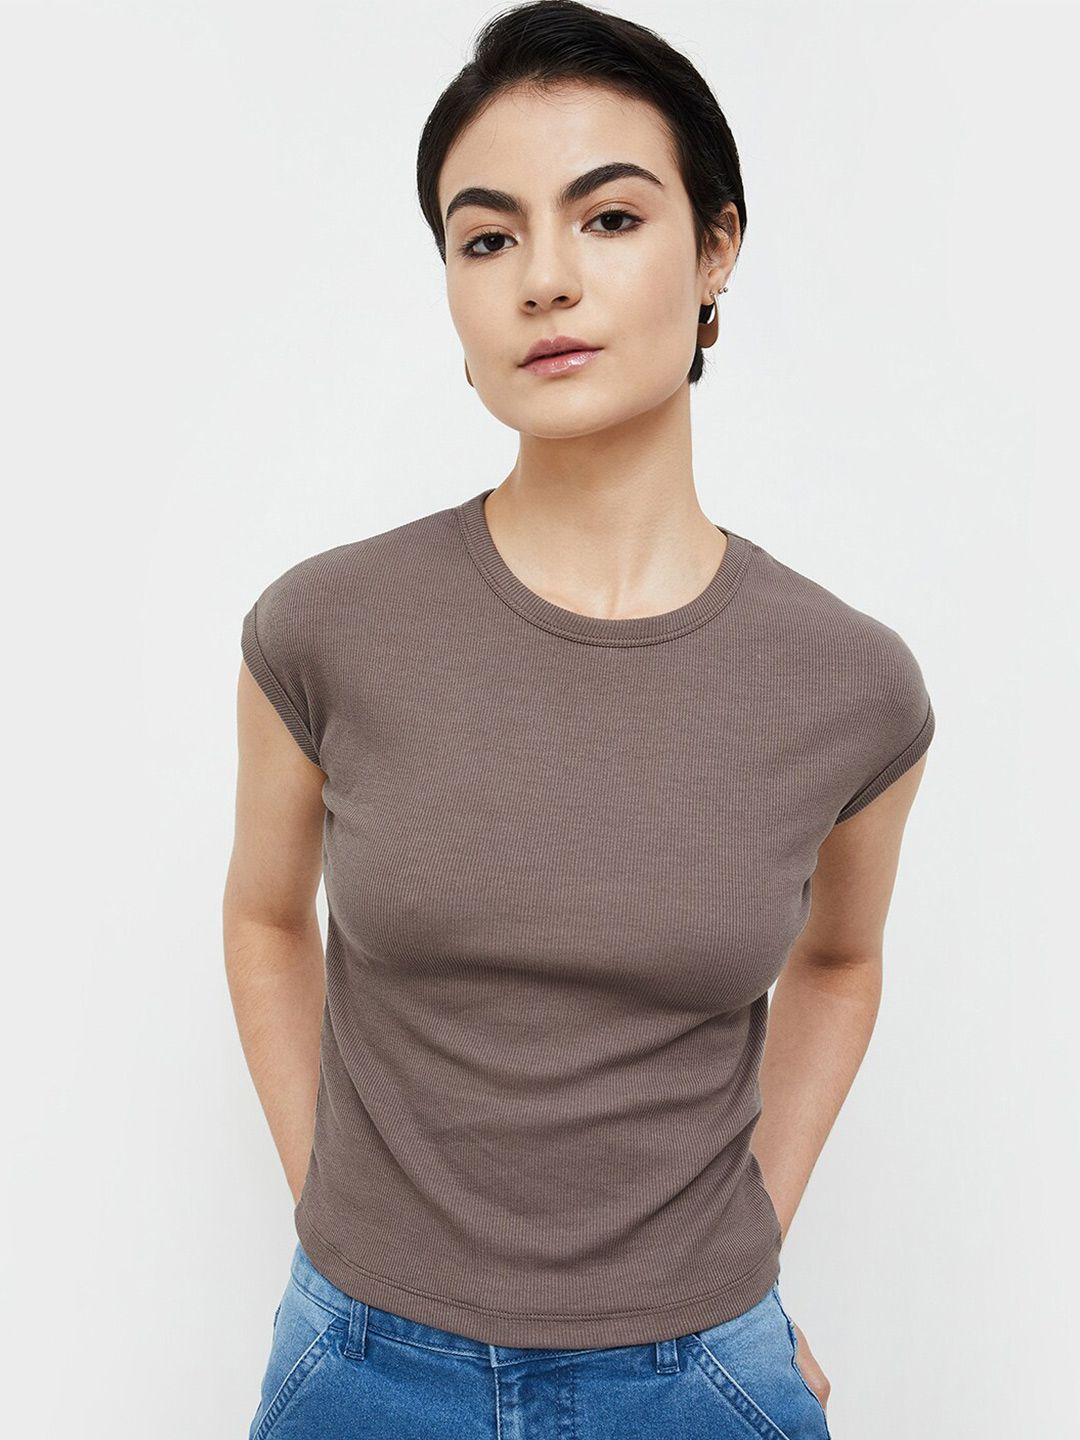 ginger by lifestyle extended sleeves cotton top